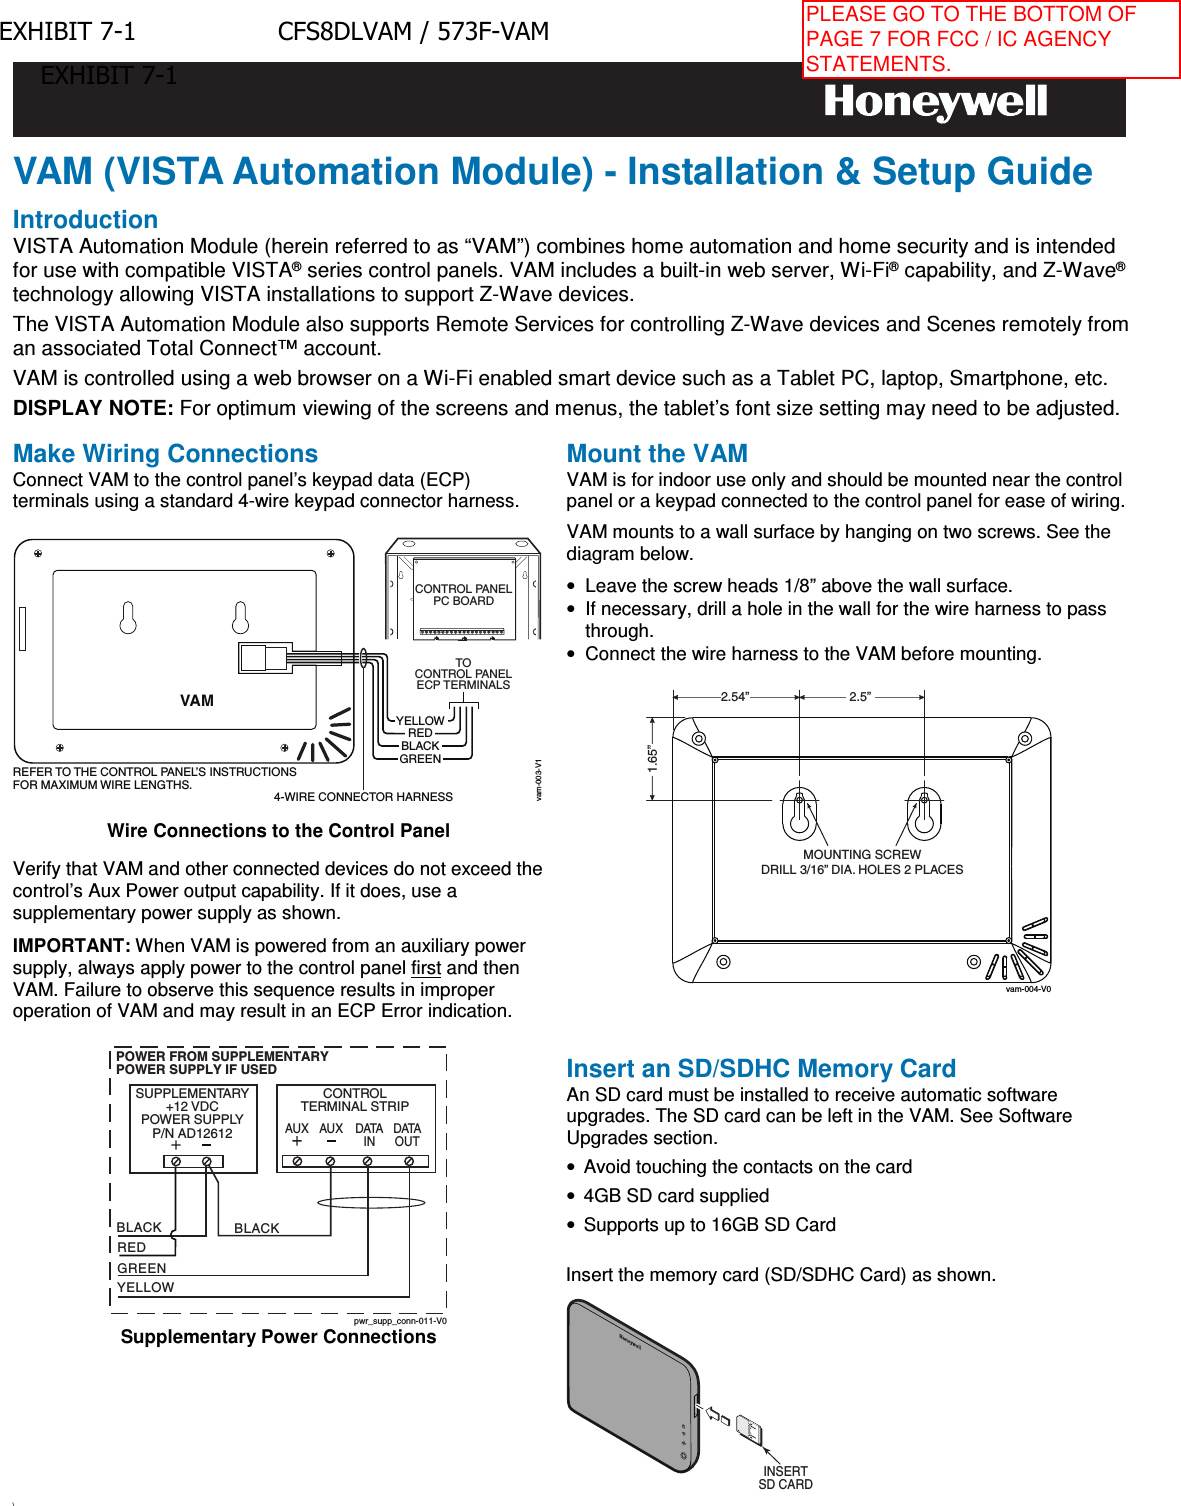 VAM (VISTA Automation Module) - Installation &amp; Setup Guide Introduction VISTA Automation Module (herein referred to as “VAM”) combines home automation and home security and is intended for use with compatible VISTA® series control panels. VAM includes a built-in web server, Wi-Fi® capability, and Z-Wave® technology allowing VISTA installations to support Z-Wave devices.  The VISTA Automation Module also supports Remote Services for controlling Z-Wave devices and Scenes remotely from an associated Total Connect™ account. VAM is controlled using a web browser on a Wi-Fi enabled smart device such as a Tablet PC, laptop, Smartphone, etc. DISPLAY NOTE: For optimum viewing of the screens and menus, the tablet’s font size setting may need to be adjusted. Make Wiring Connections Connect VAM to the control panel’s keypad data (ECP) terminals using a standard 4-wire keypad connector harness. vam-003-V1TOCONTROL PANELECP TERMINALSYELLOWREDBLACKGREENCONTROL PANELPC BOARDVAMREFER TO THE CONTROL PANEL’S INSTRUCTIONSFOR MAXIMUM WIRE LENGTHS.4-WIRE CONNECTOR HARNESSWire Connections to the Control Panel Verify that VAM and other connected devices do not exceed the control’s Aux Power output capability. If it does, use a supplementary power supply as shown. IMPORTANT: When VAM is powered from an auxiliary power supply, always apply power to the control panel first and then VAM. Failure to observe this sequence results in improper operation of VAM and may result in an ECP Error indication. pwr_supp_conn-011-V0BLACKPOWER FROM SUPPLEMENTARYPOWER SUPPLY IF USEDRED BLACKGREENYELLOWCONTROLTERMINAL STRIPSUPPLEMENTARY+12 VDCPOWER SUPPLYP/N AD12612DATAINDATAOUTAUX AUXSupplementary Power Connections Mount the VAM VAM is for indoor use only and should be mounted near the control panel or a keypad connected to the control panel for ease of wiring. VAM mounts to a wall surface by hanging on two screws. See the diagram below. •Leave the screw heads 1/8” above the wall surface.•If necessary, drill a hole in the wall for the wire harness to passthrough.•Connect the wire harness to the VAM before mounting.MOUNTING SCREWDRILL 3/16” DIA. HOLES 2 PLACES1.65”2.5”2.54”vam-004-V0Insert an SD/SDHC Memory Card An SD card must be installed to receive automatic software upgrades. The SD card can be left in the VAM. See Software Upgrades section. •Avoid touching the contacts on the card•4GB SD card supplied•Supports up to 16GB SD CardInsert the memory card (SD/SDHC Card) as shown. INSERTSD CARD\ EXHIBIT 7-1 CFS8DLVAM / 573F-VAMEXHIBIT 7-1PLEASE GO TO THE BOTTOM OF PAGE 7 FOR FCC / IC AGENCY STATEMENTS.